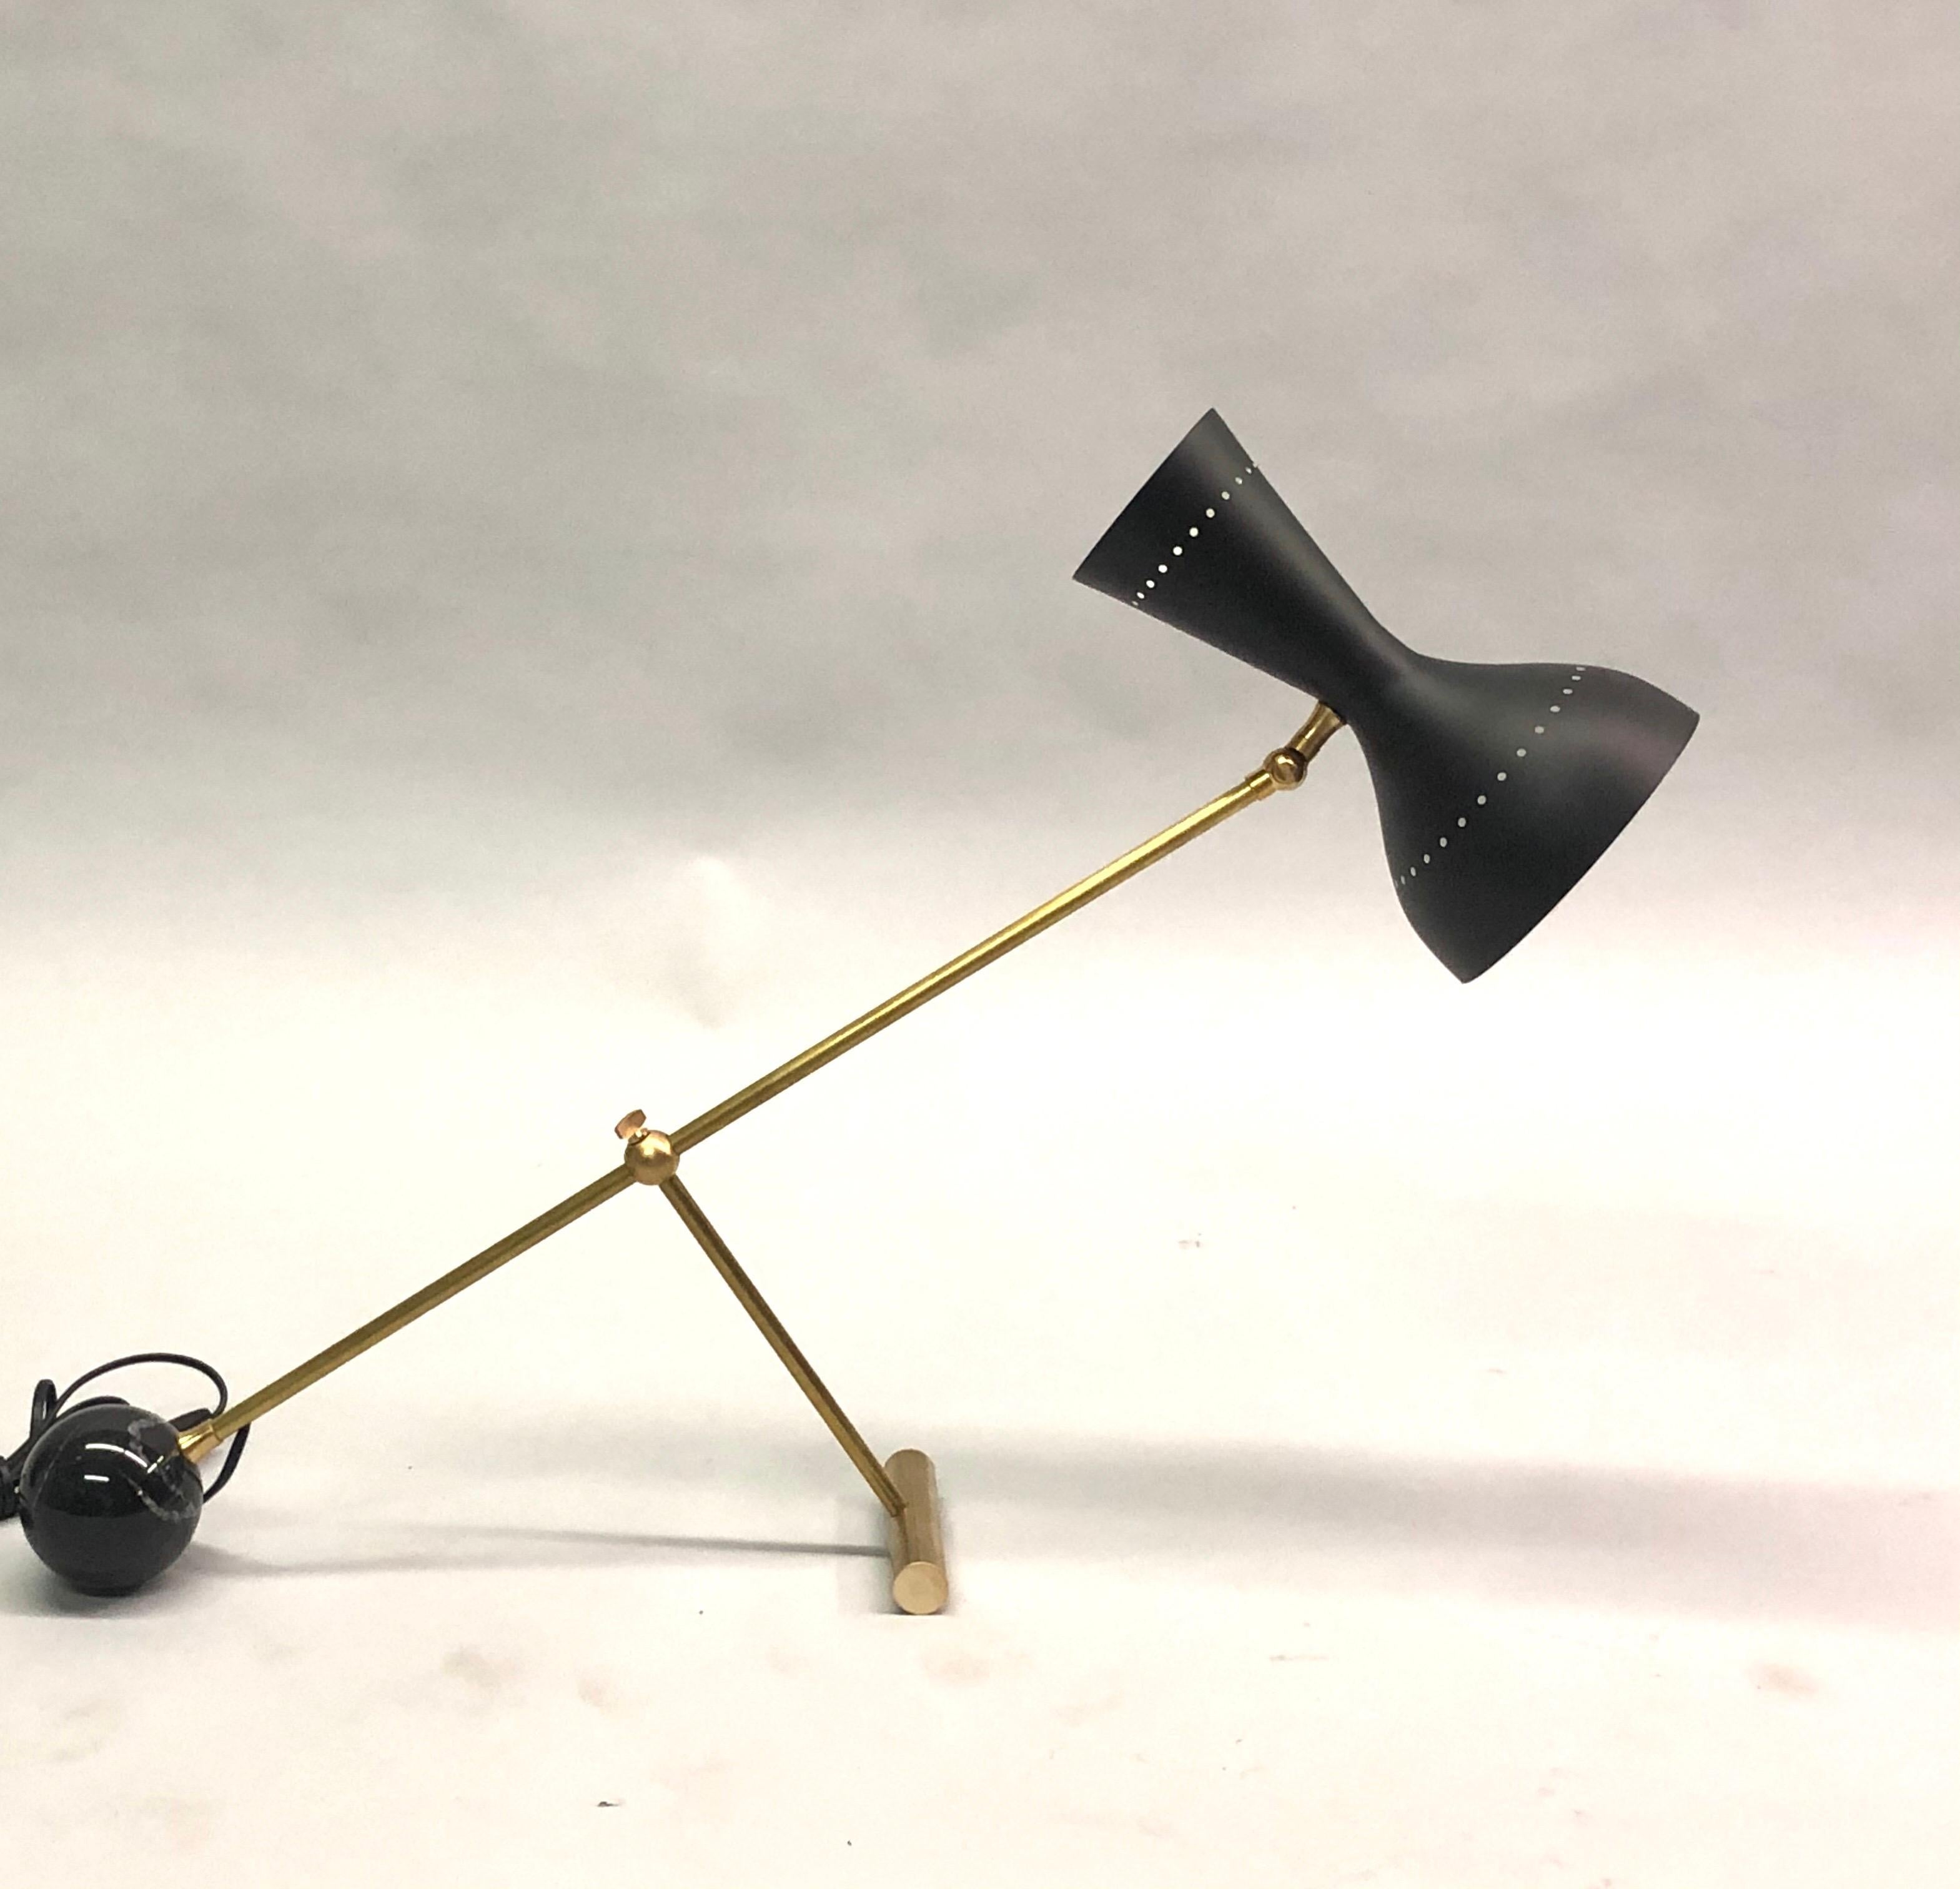 Elegant Italian Mid-Century Modern style desk or table lamp in the style of Angelo Lelli for Arredoluce composed of a round ball black marble base anchoring a solid brass articulating stem and a black enameled double shade with 1 socket in each